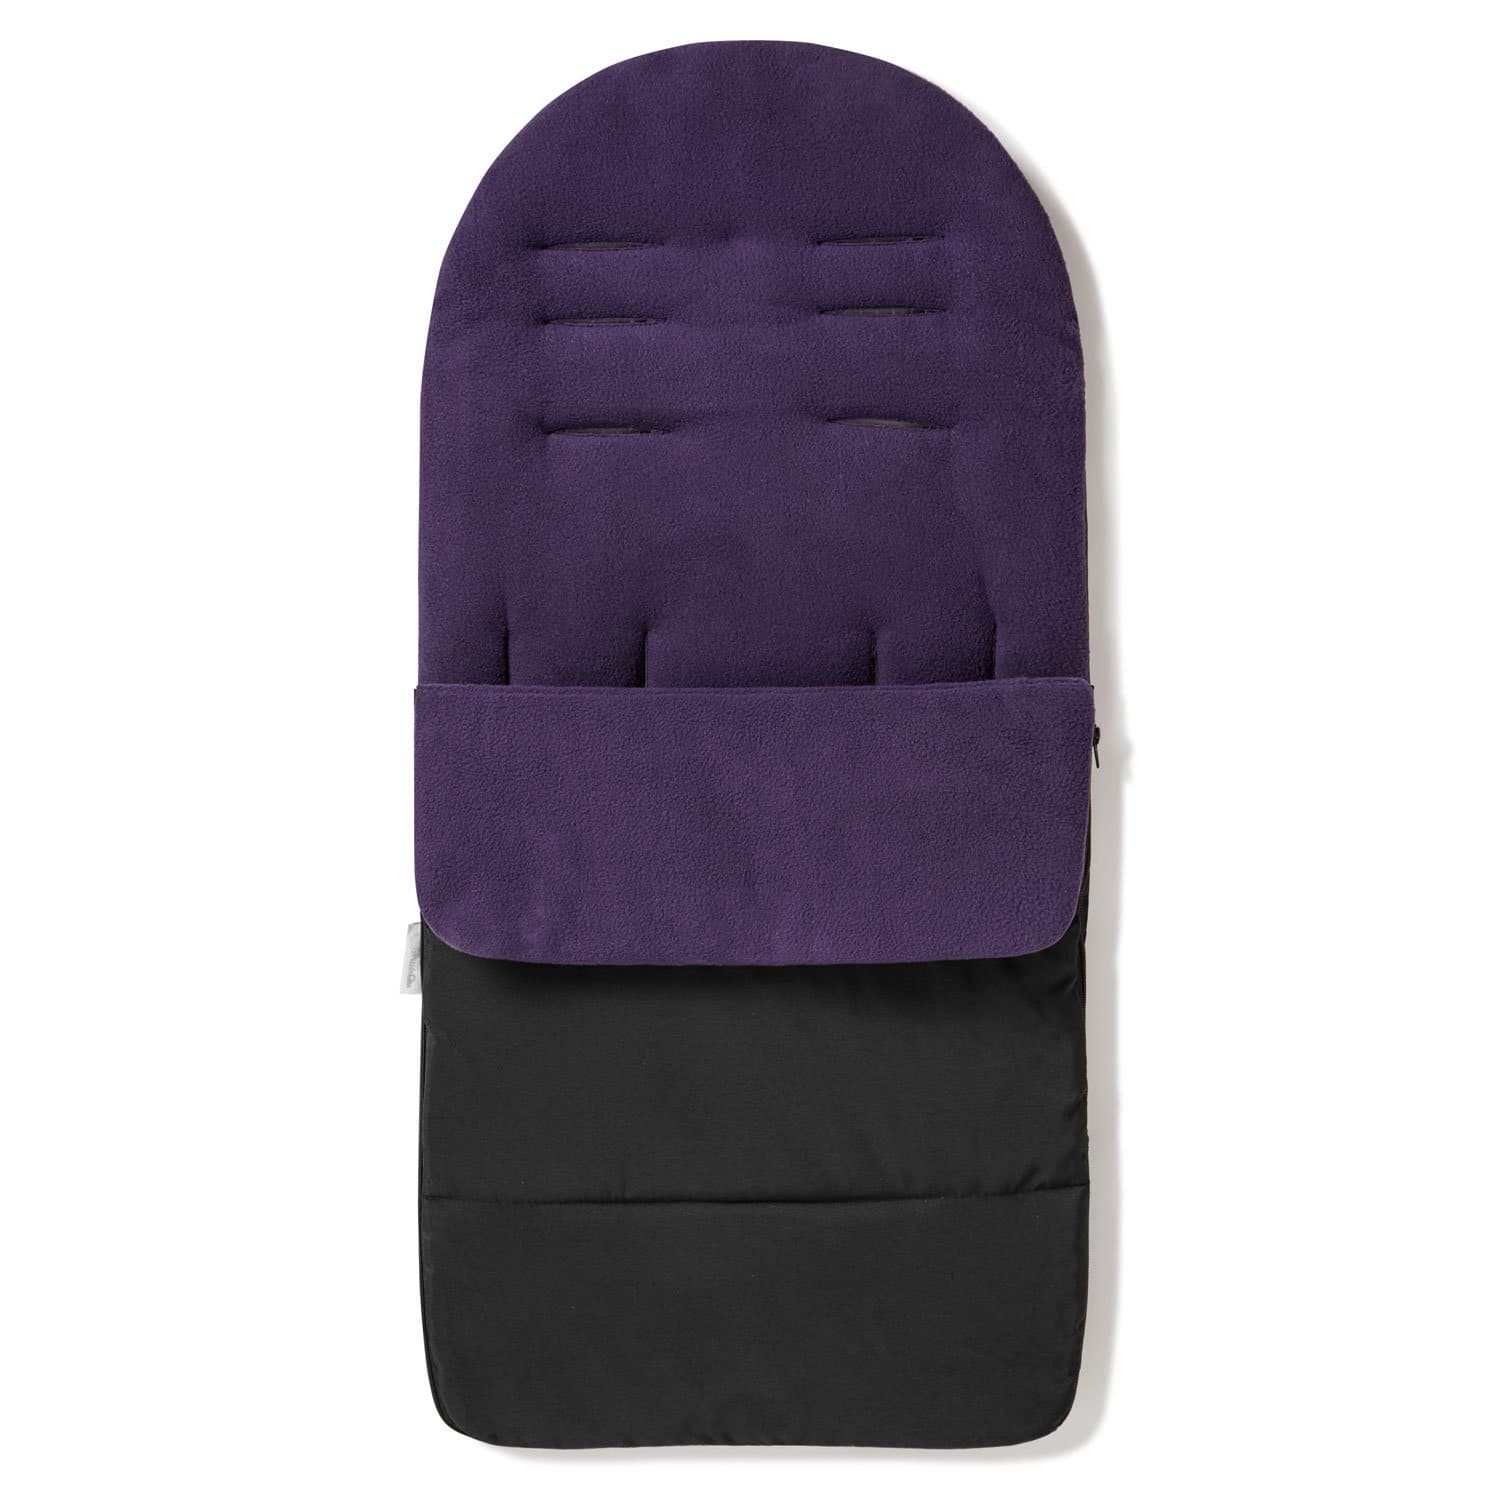 Premium Footmuff / Cosy Toes Compatible with Egg - For Your Little One